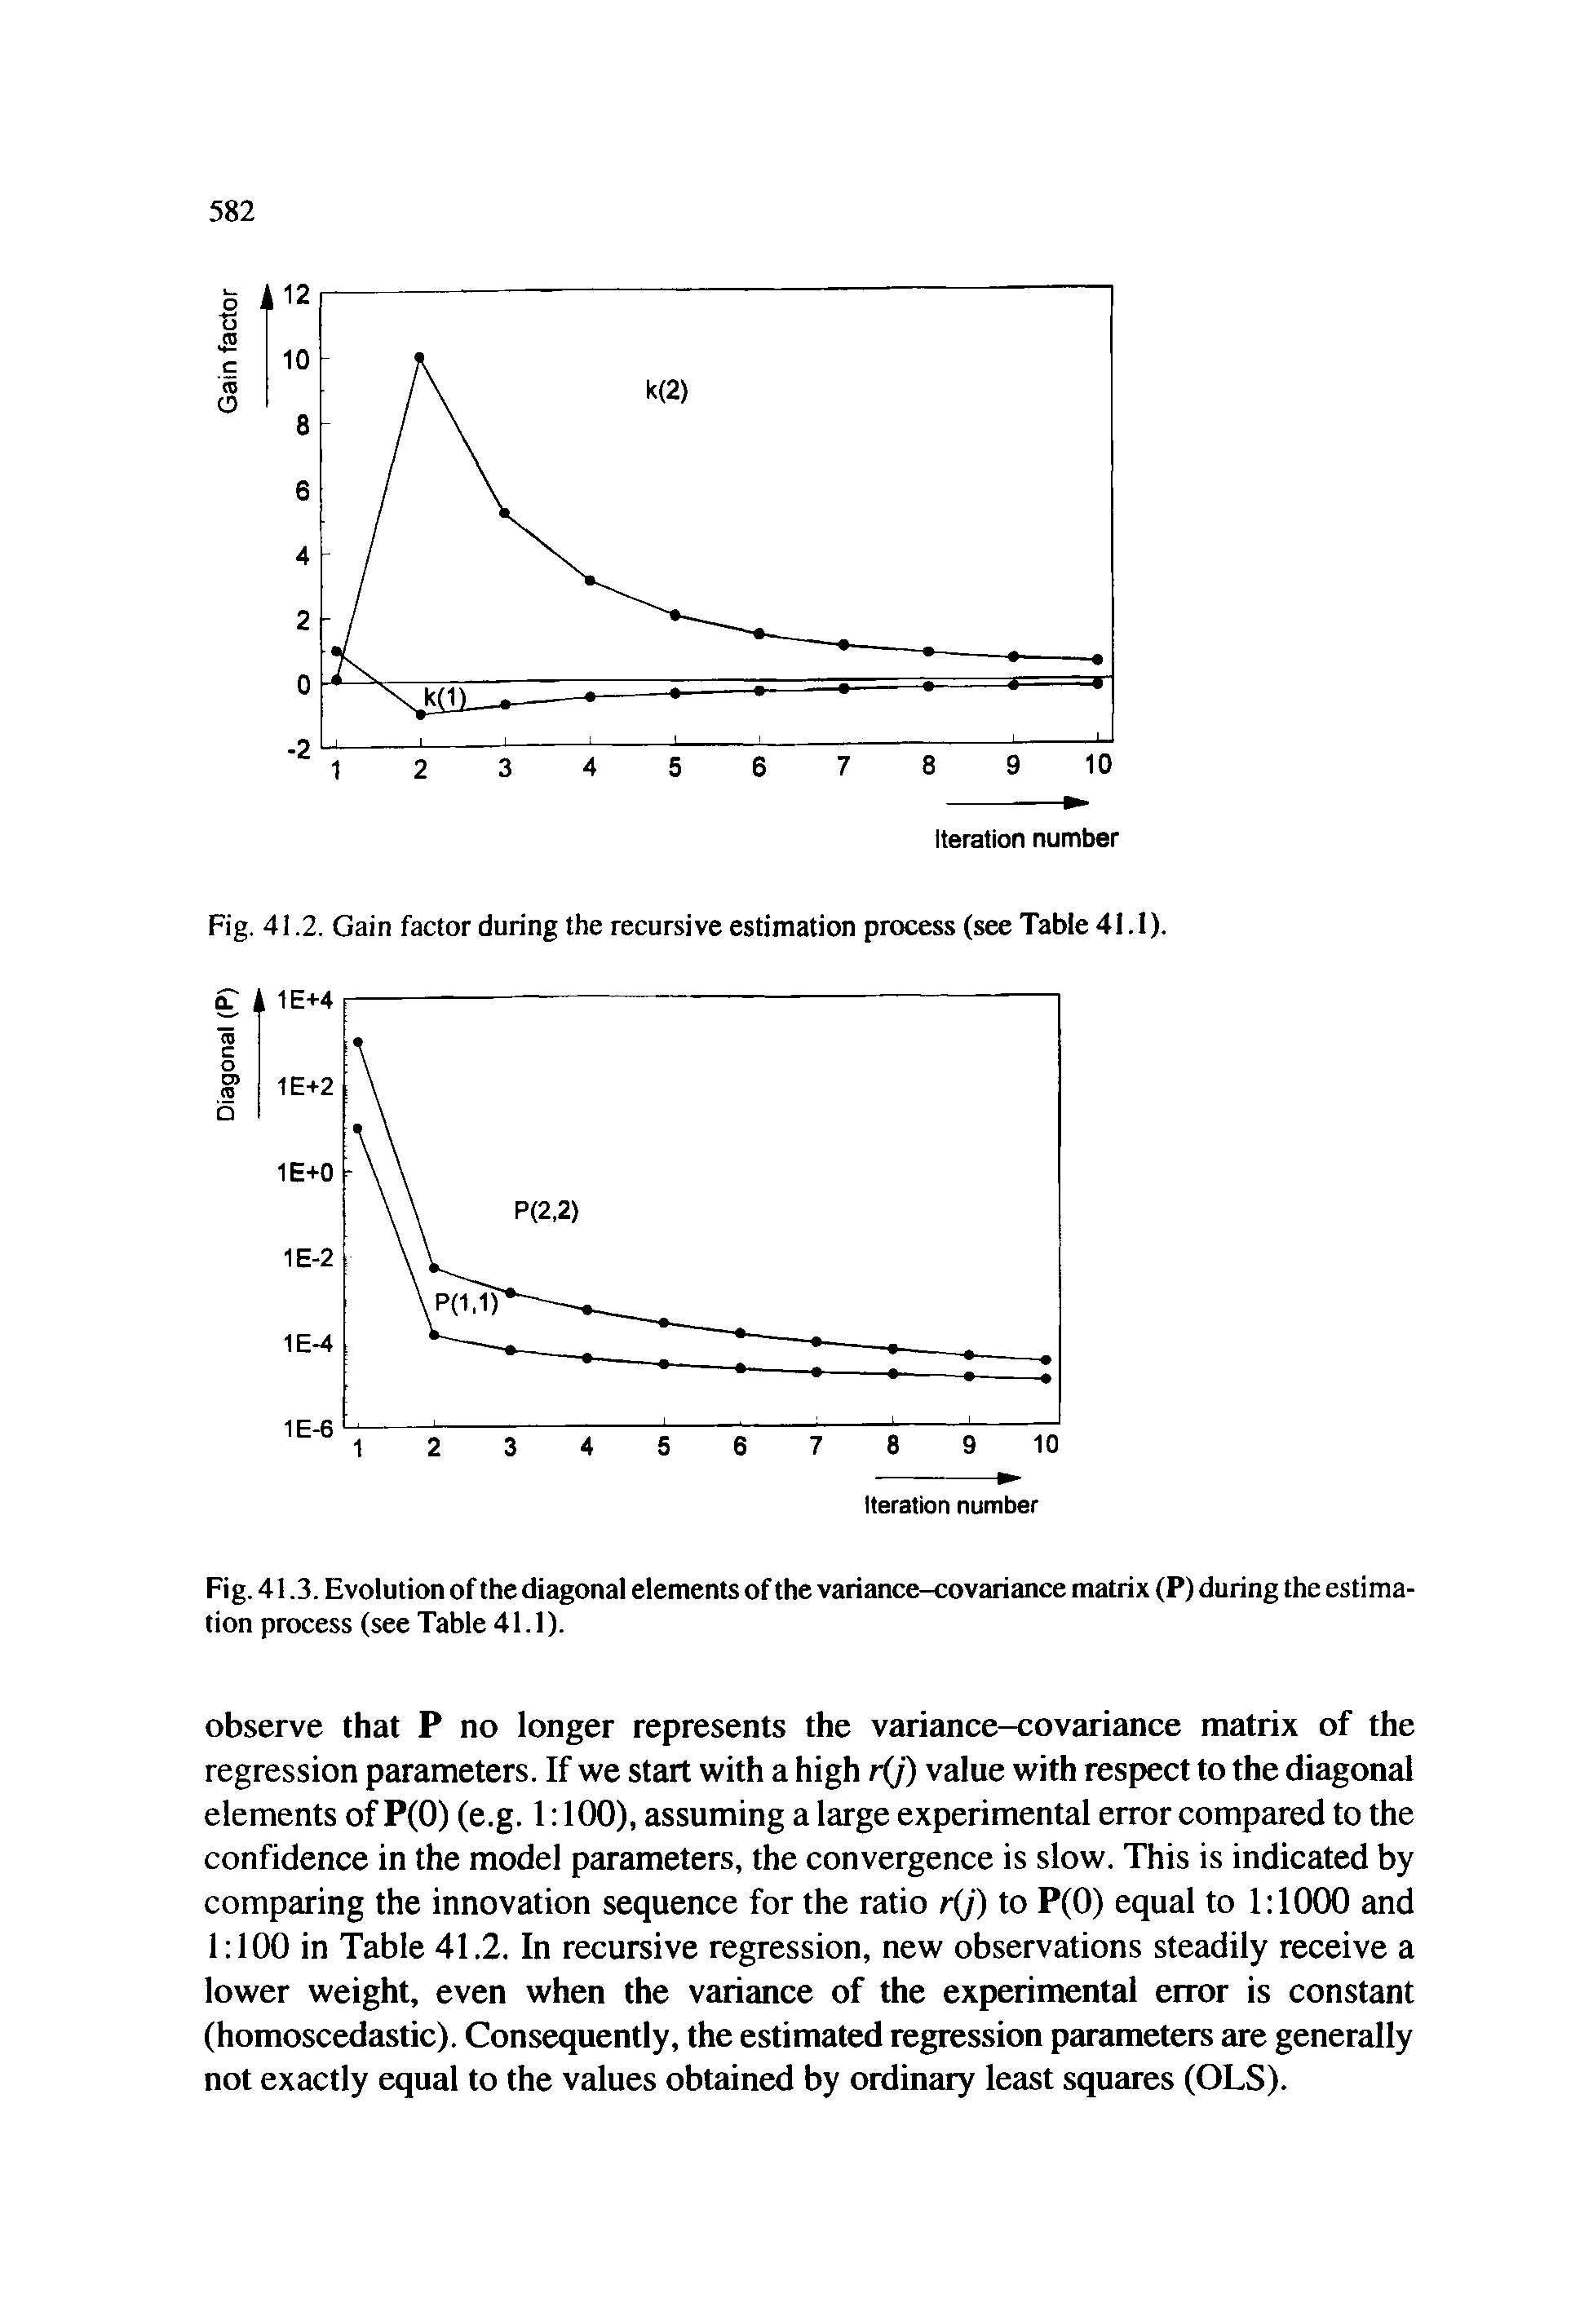 Fig. 41.3. Evolution of the diagonal elements of the variance-covariance matrix (P) during the estimation process (see Table 41.1).